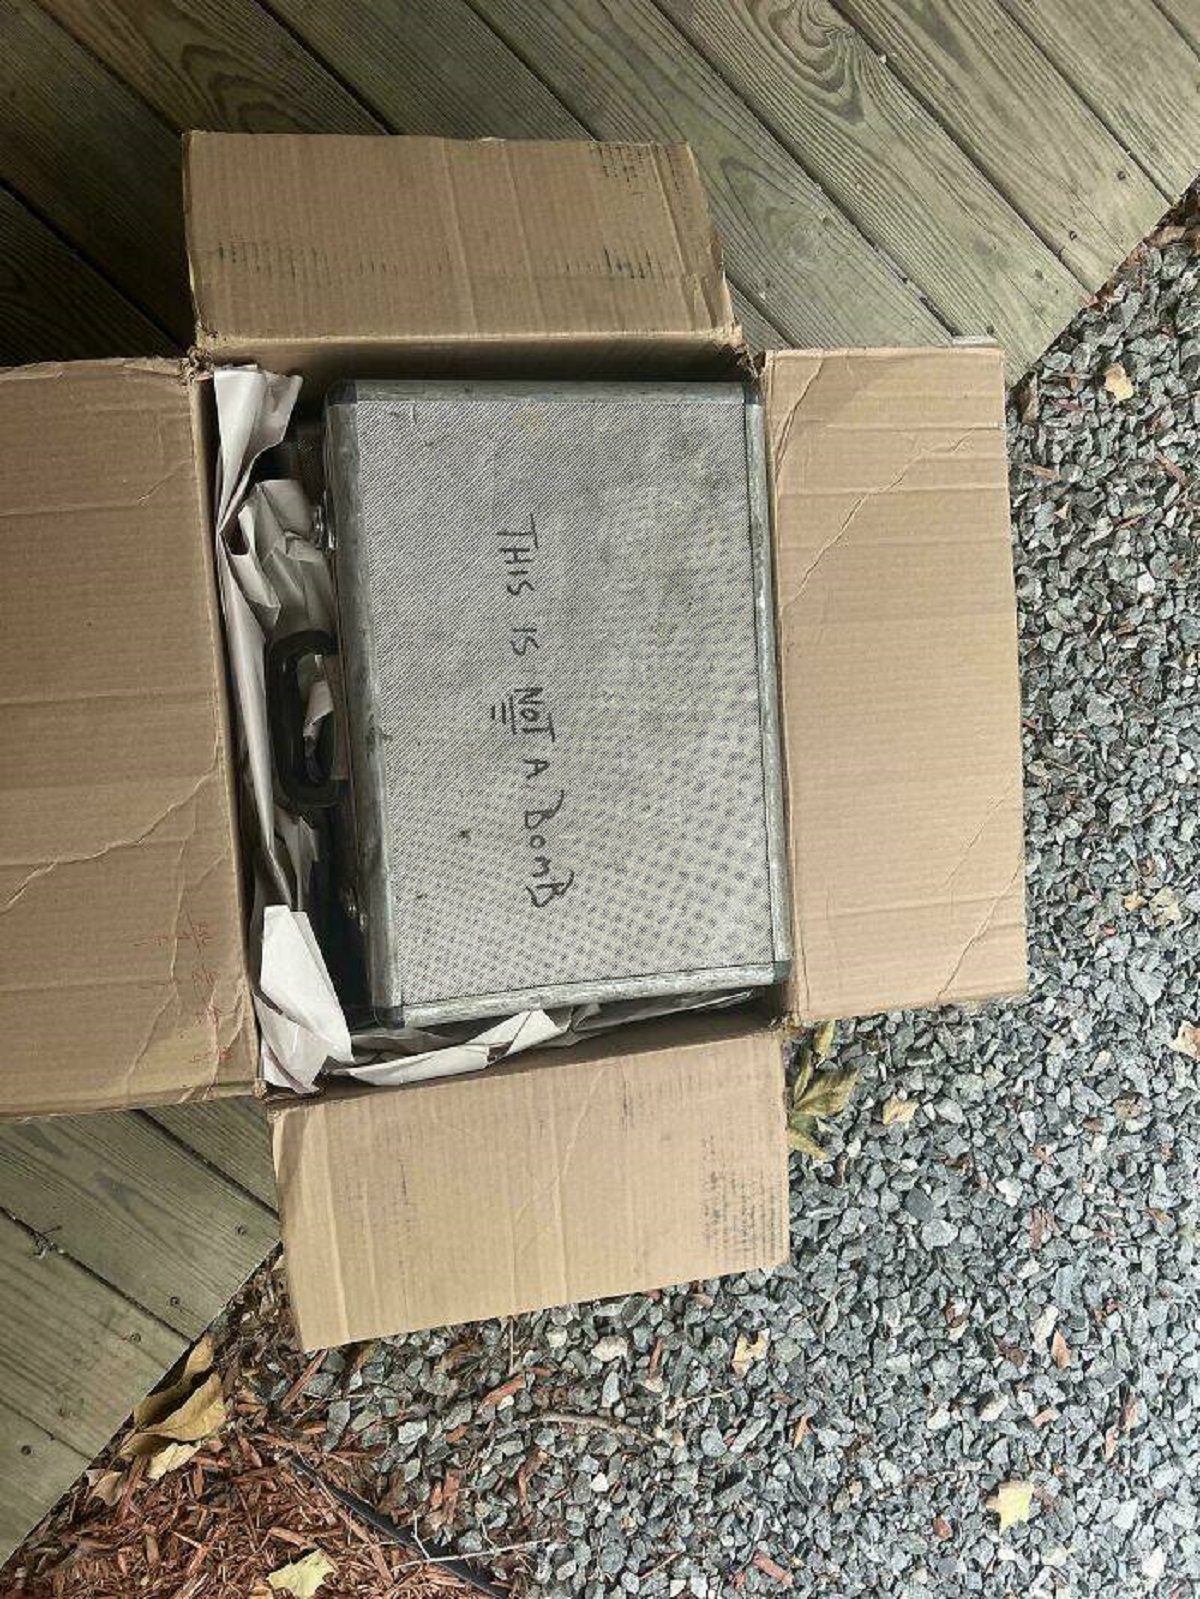 "A Package I Received Today"